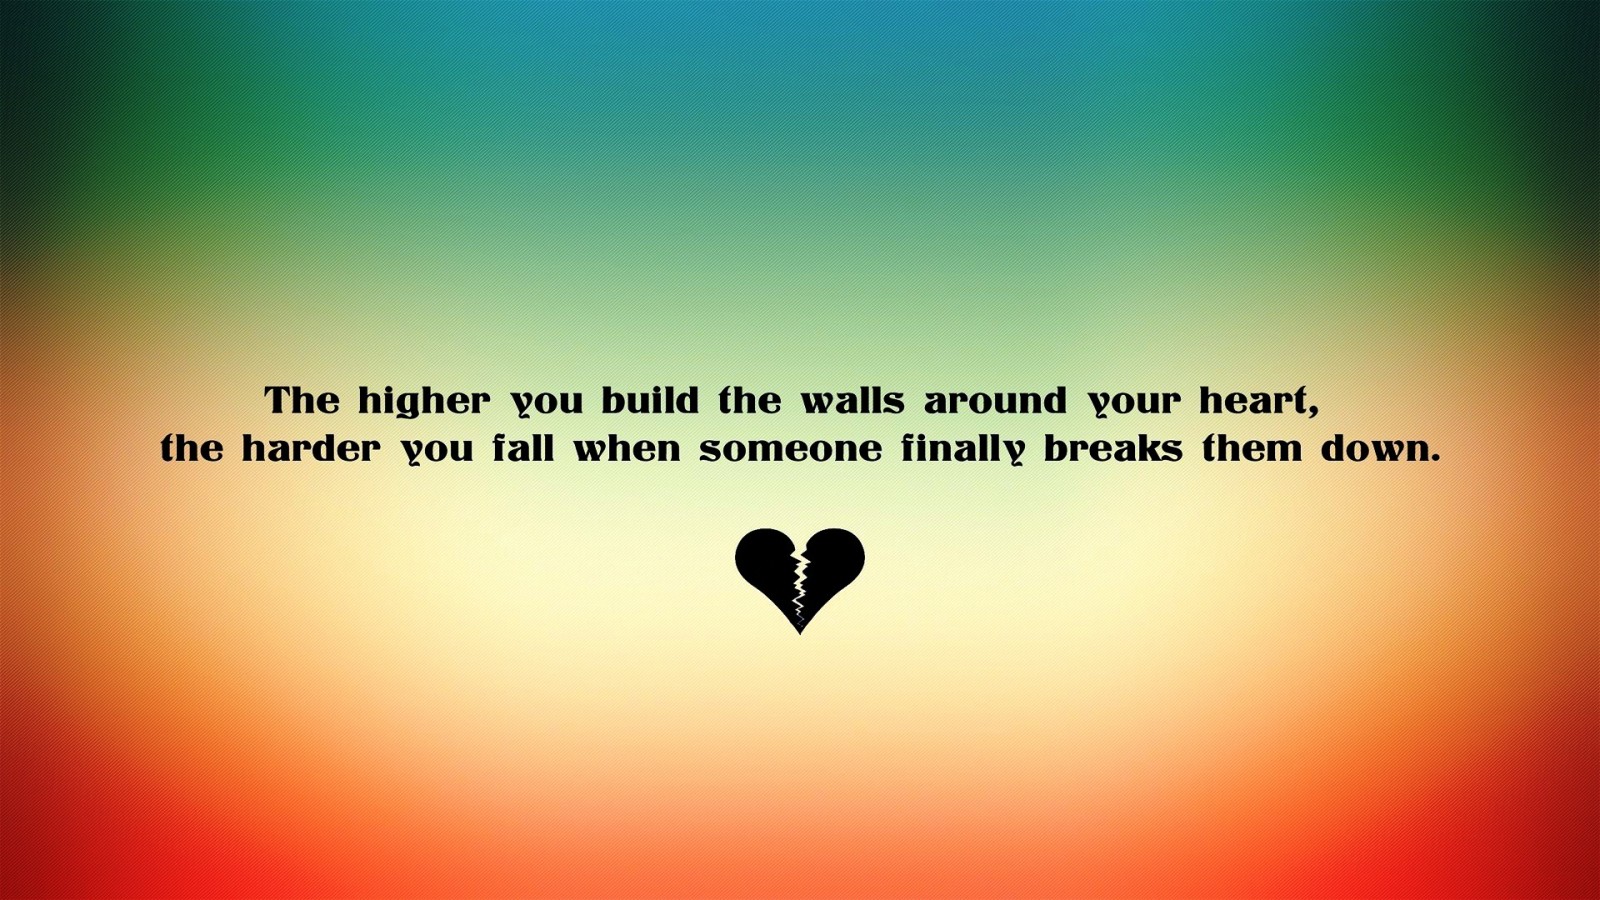 25 Broken Heart Quotes with Images